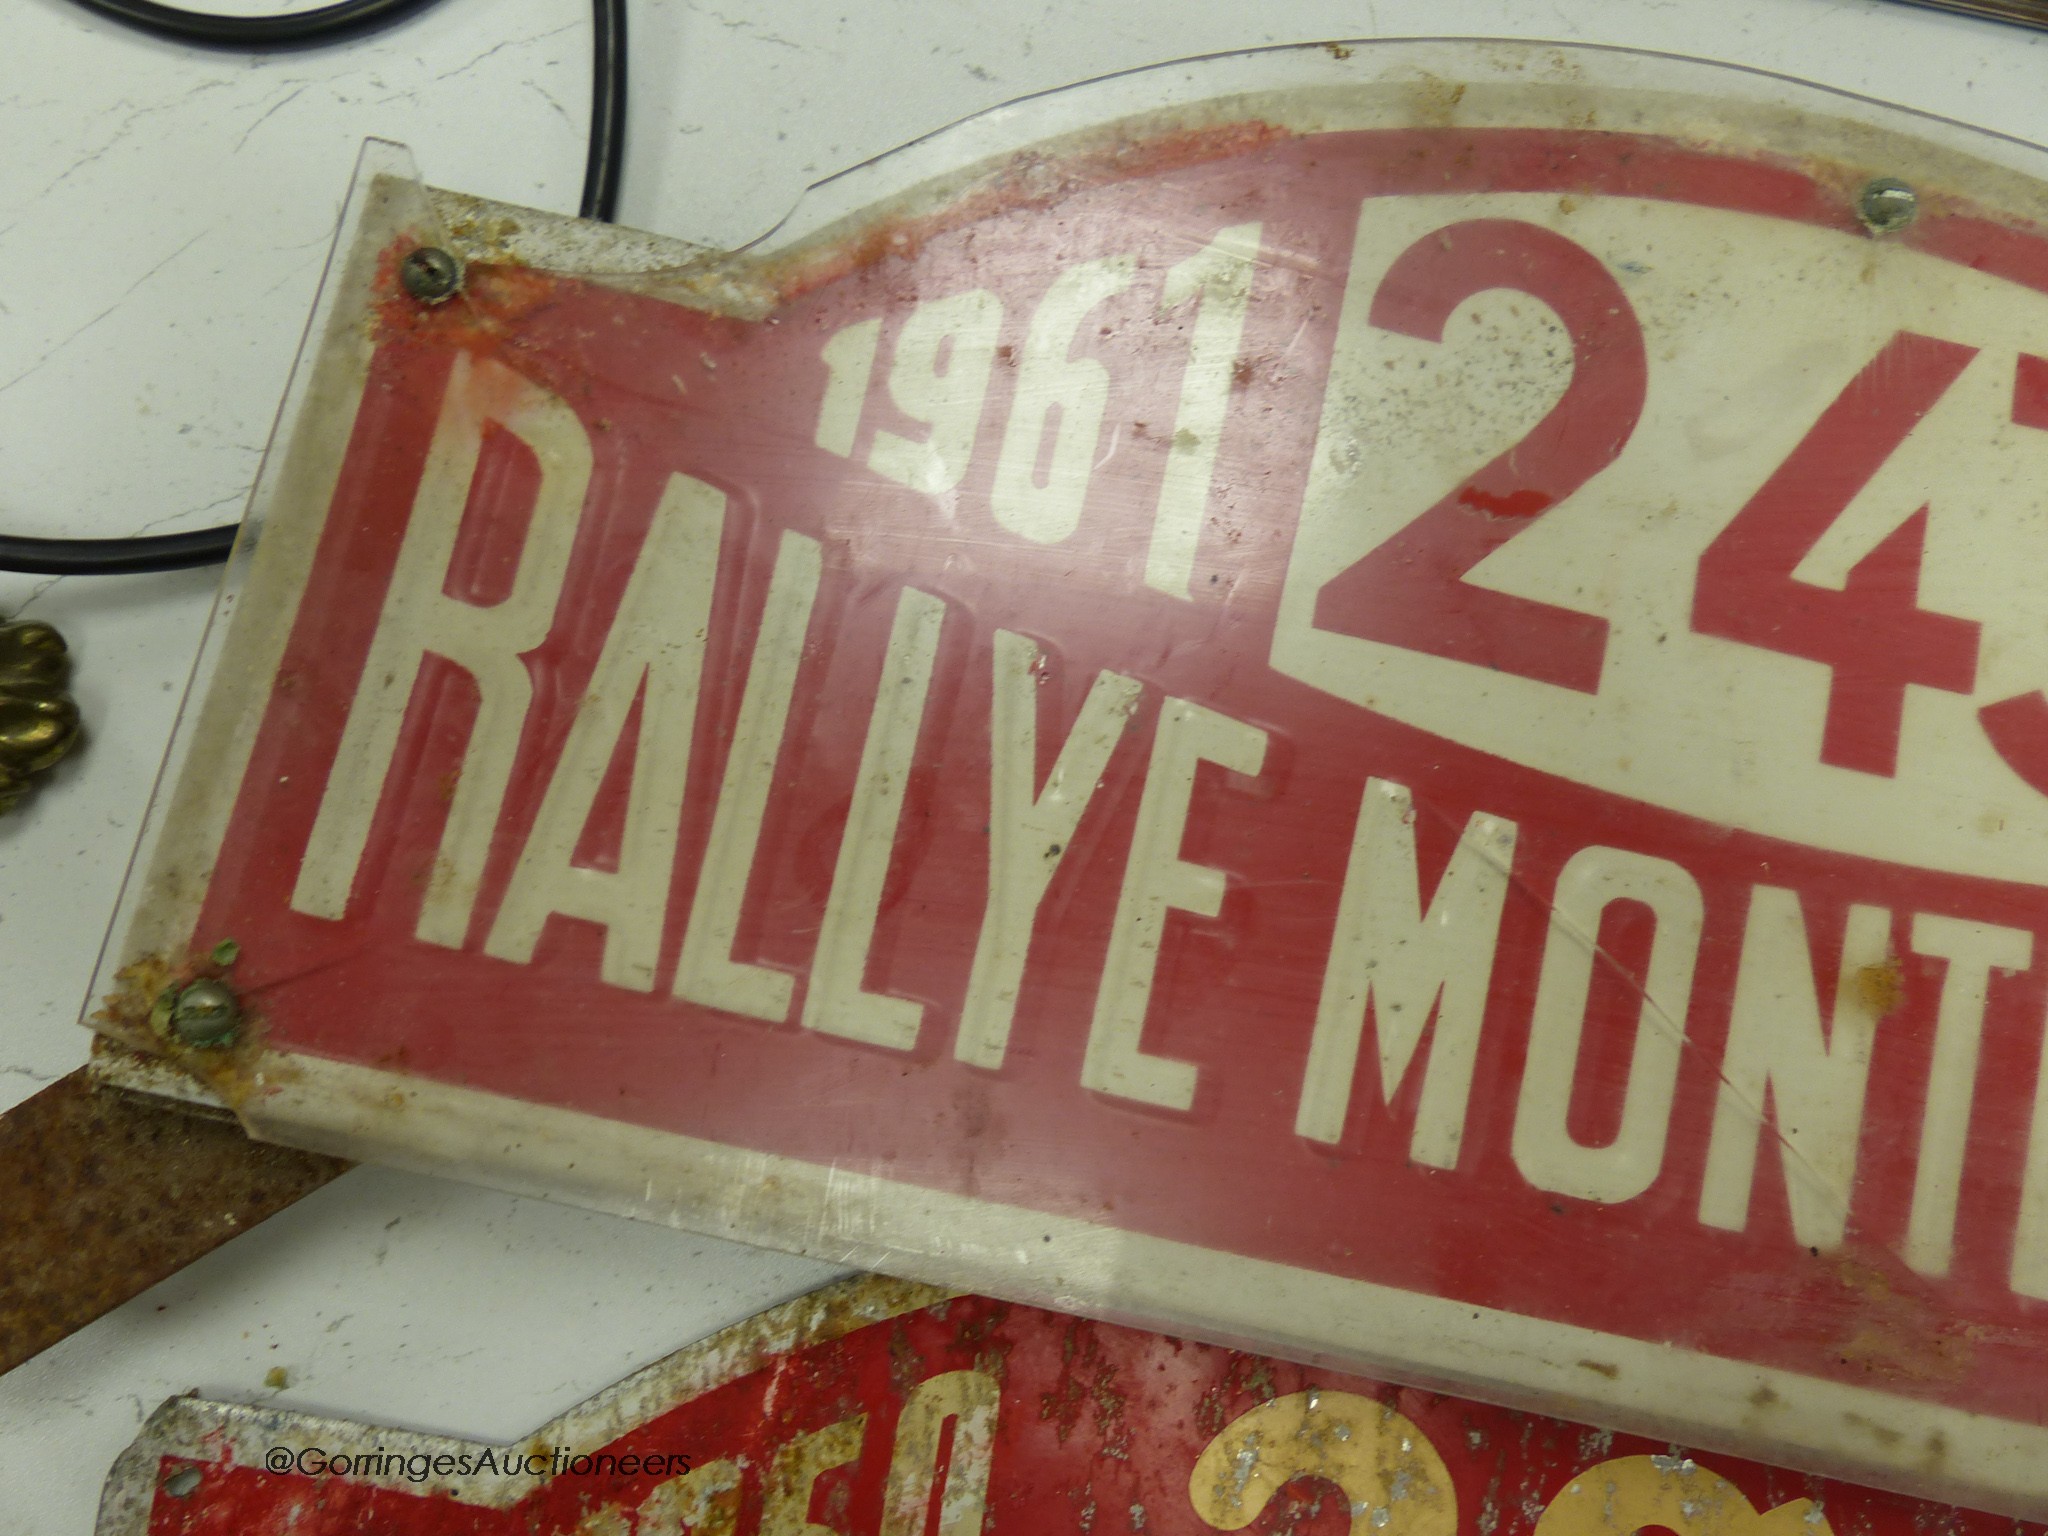 Two Rallye Monte Carlo aluminium rally number, plates, 1960 and 1961 - Image 7 of 7